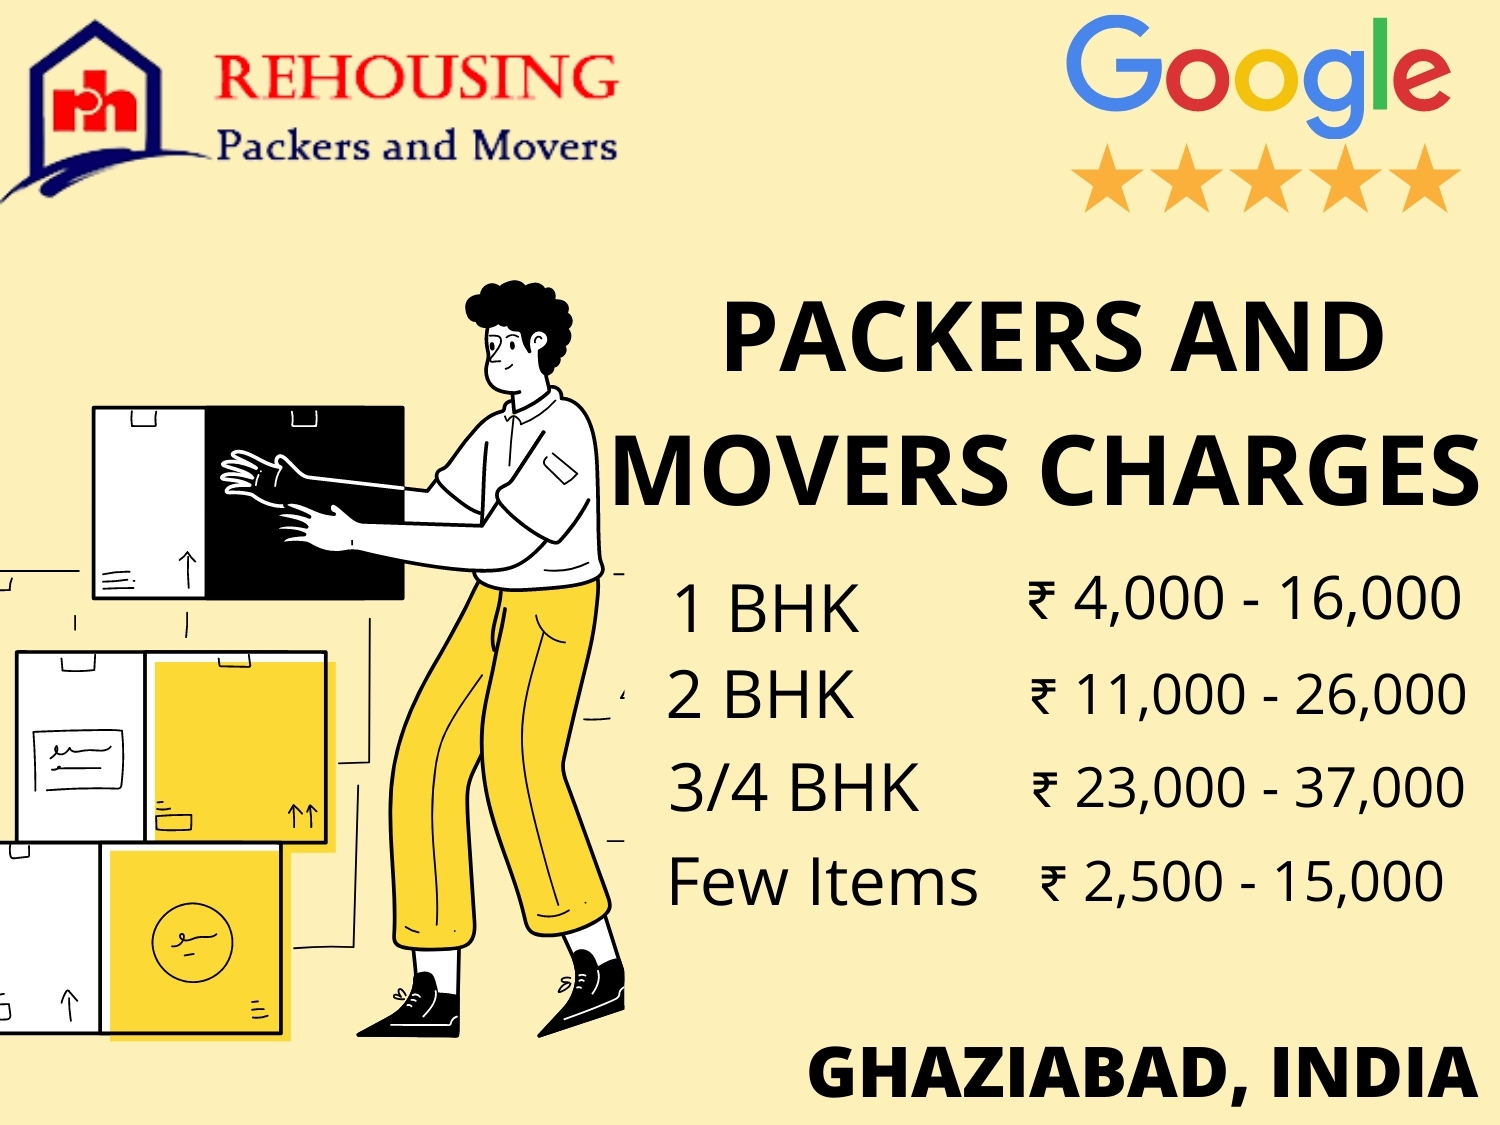 hire packers and movers from us?